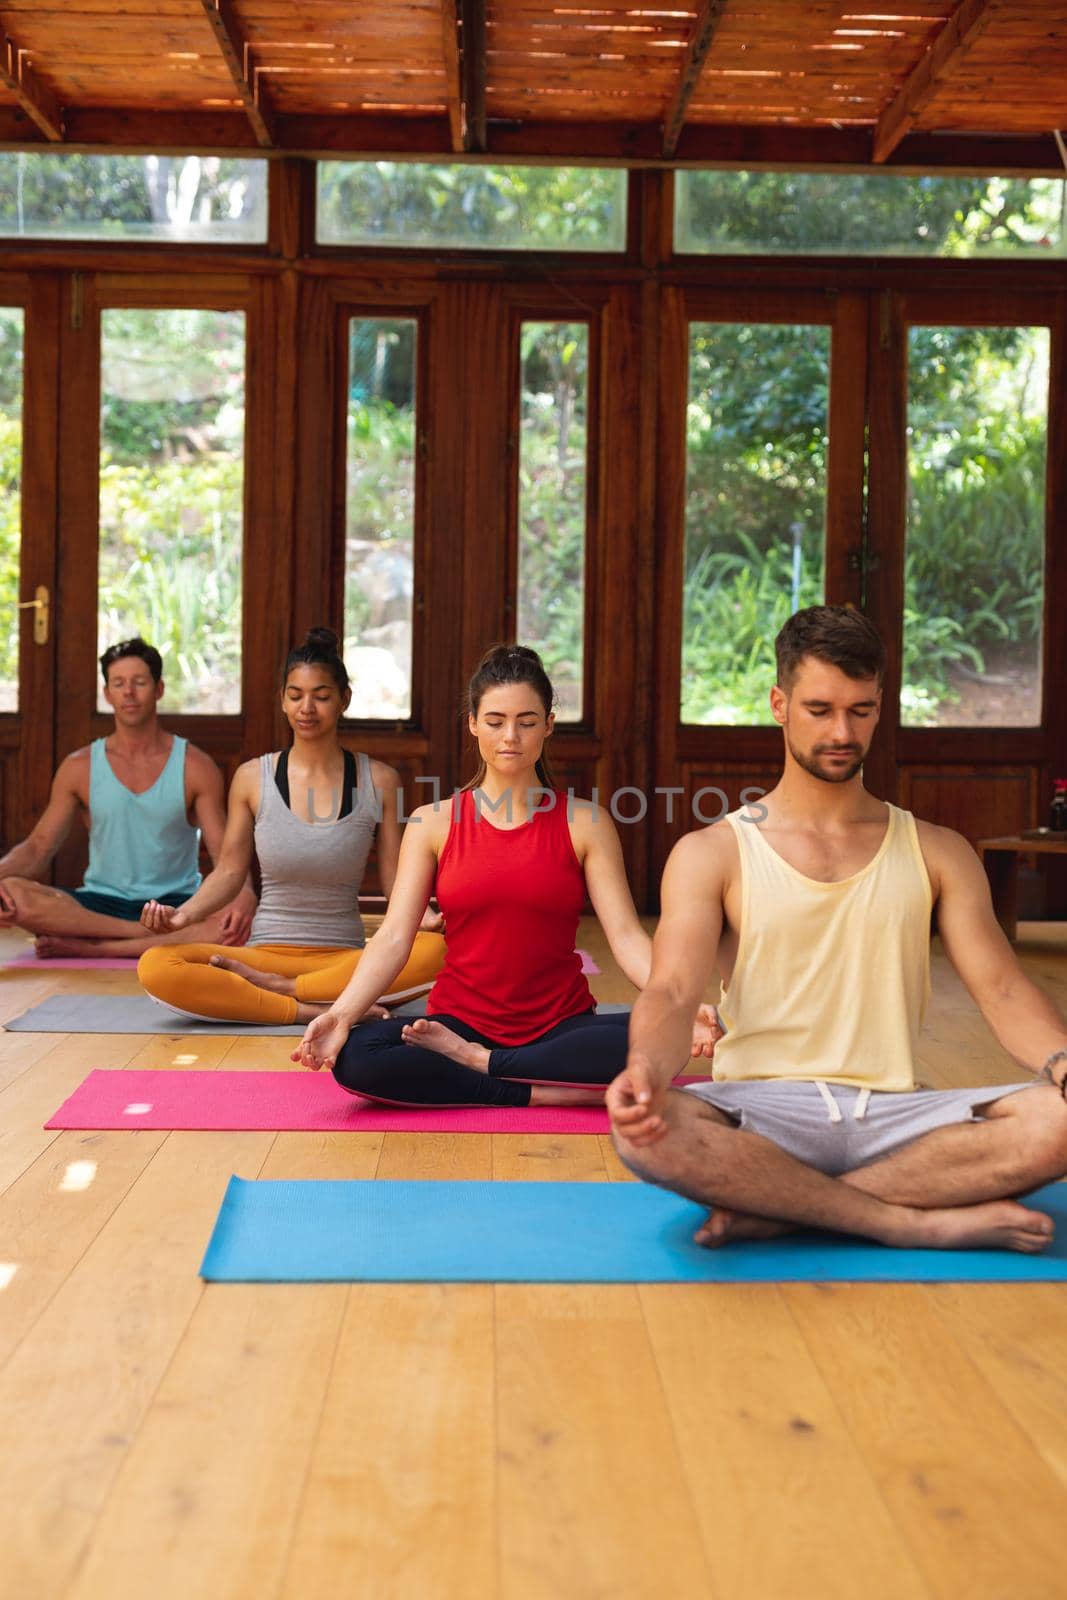 Men and women meditating while sitting on exercise mats at health club by Wavebreakmedia